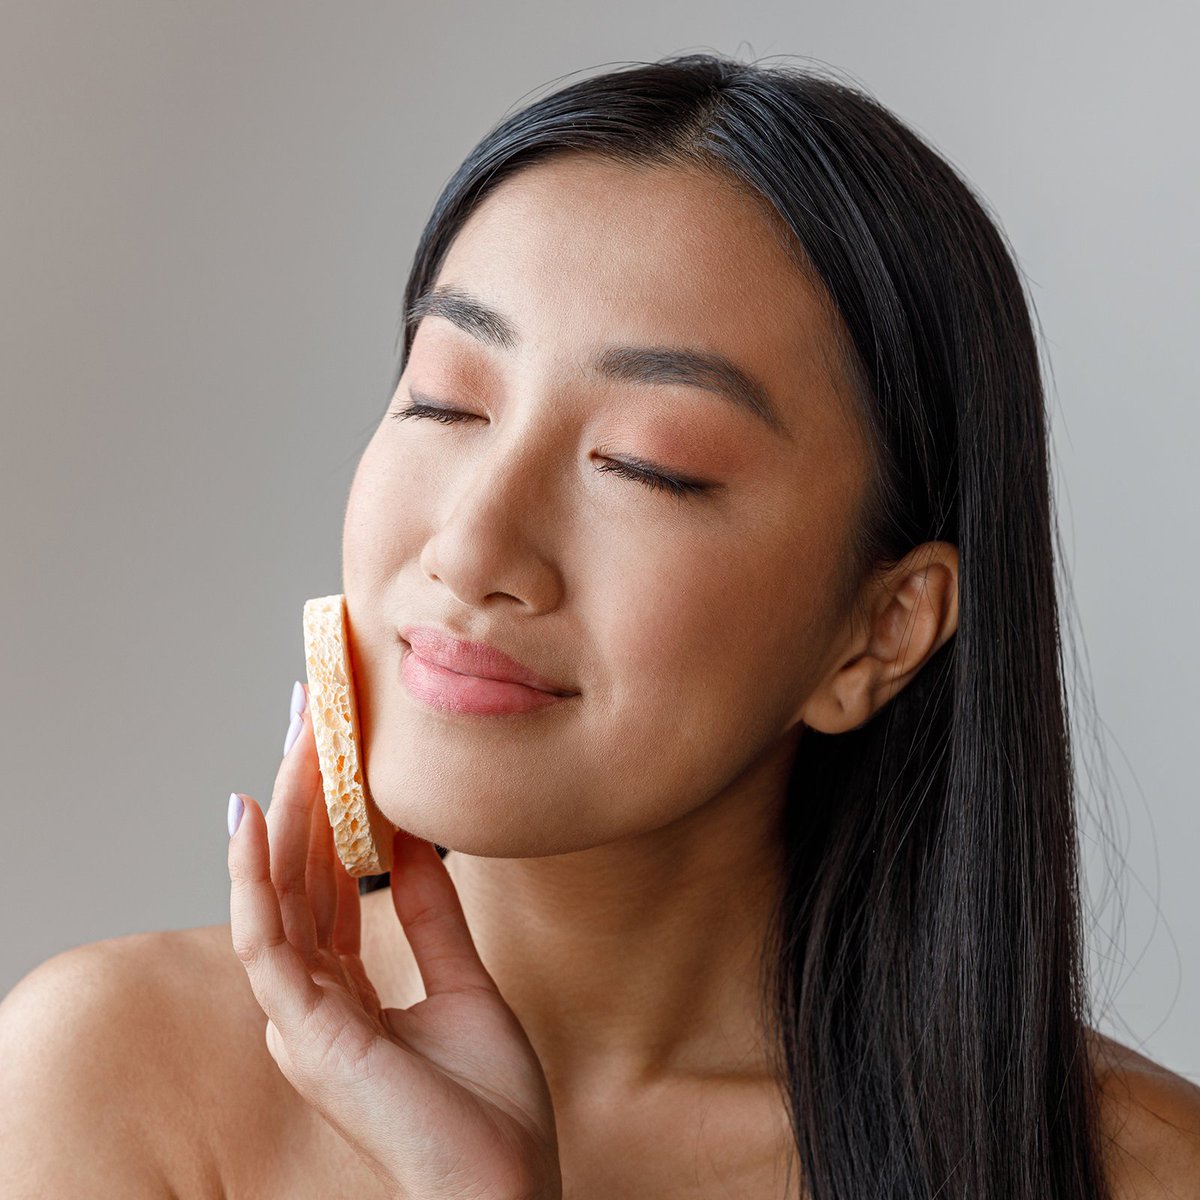 Check out this blog for signs of over-exfoliation and ways to avoid it! #nhp #overexfoliation #skincaretips #exfoliation #healthyskin #skinbarrier #skincare101